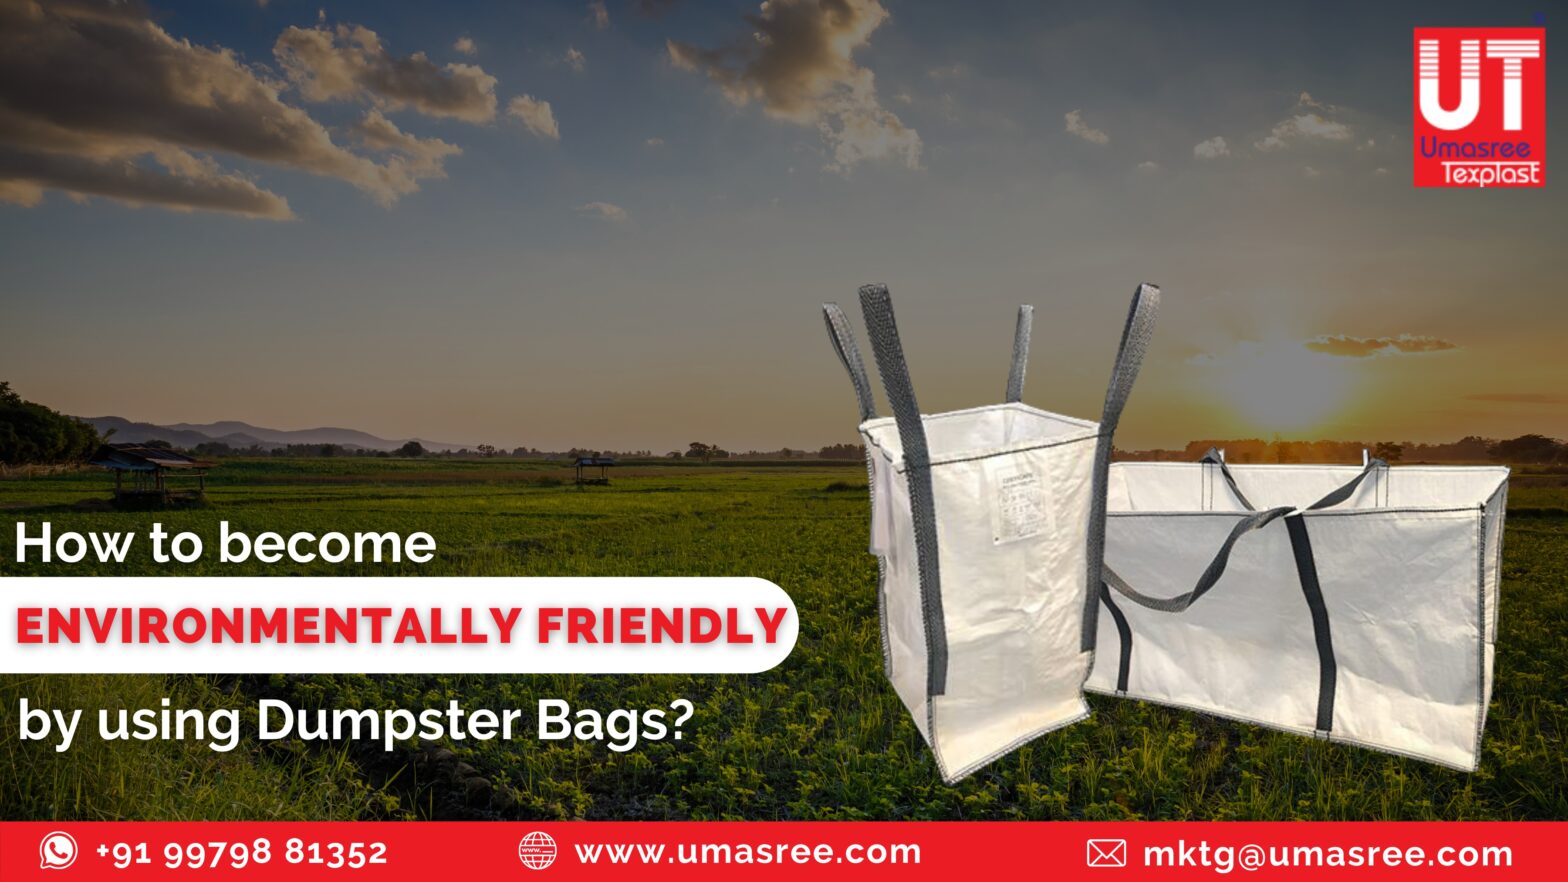 How to Become Environmentally Friendly by using Dumpster Bags?